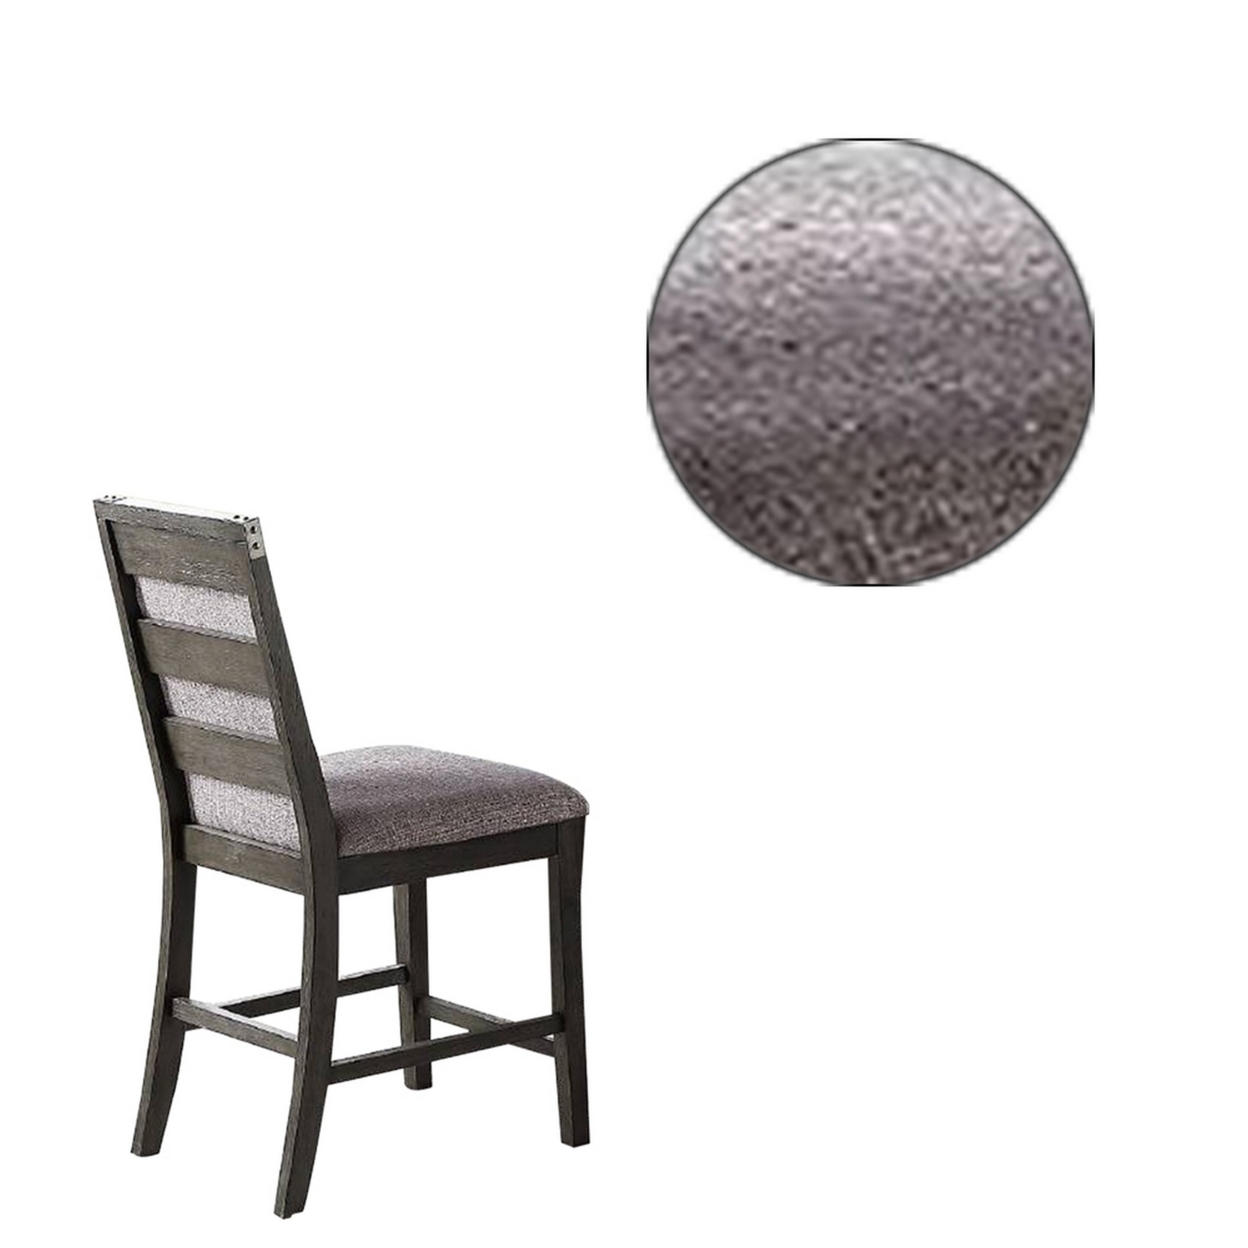 Wooden High Chairs With Upholstered Seat And Backrest, Set Of 2, Gray - Saltoro Sherpi